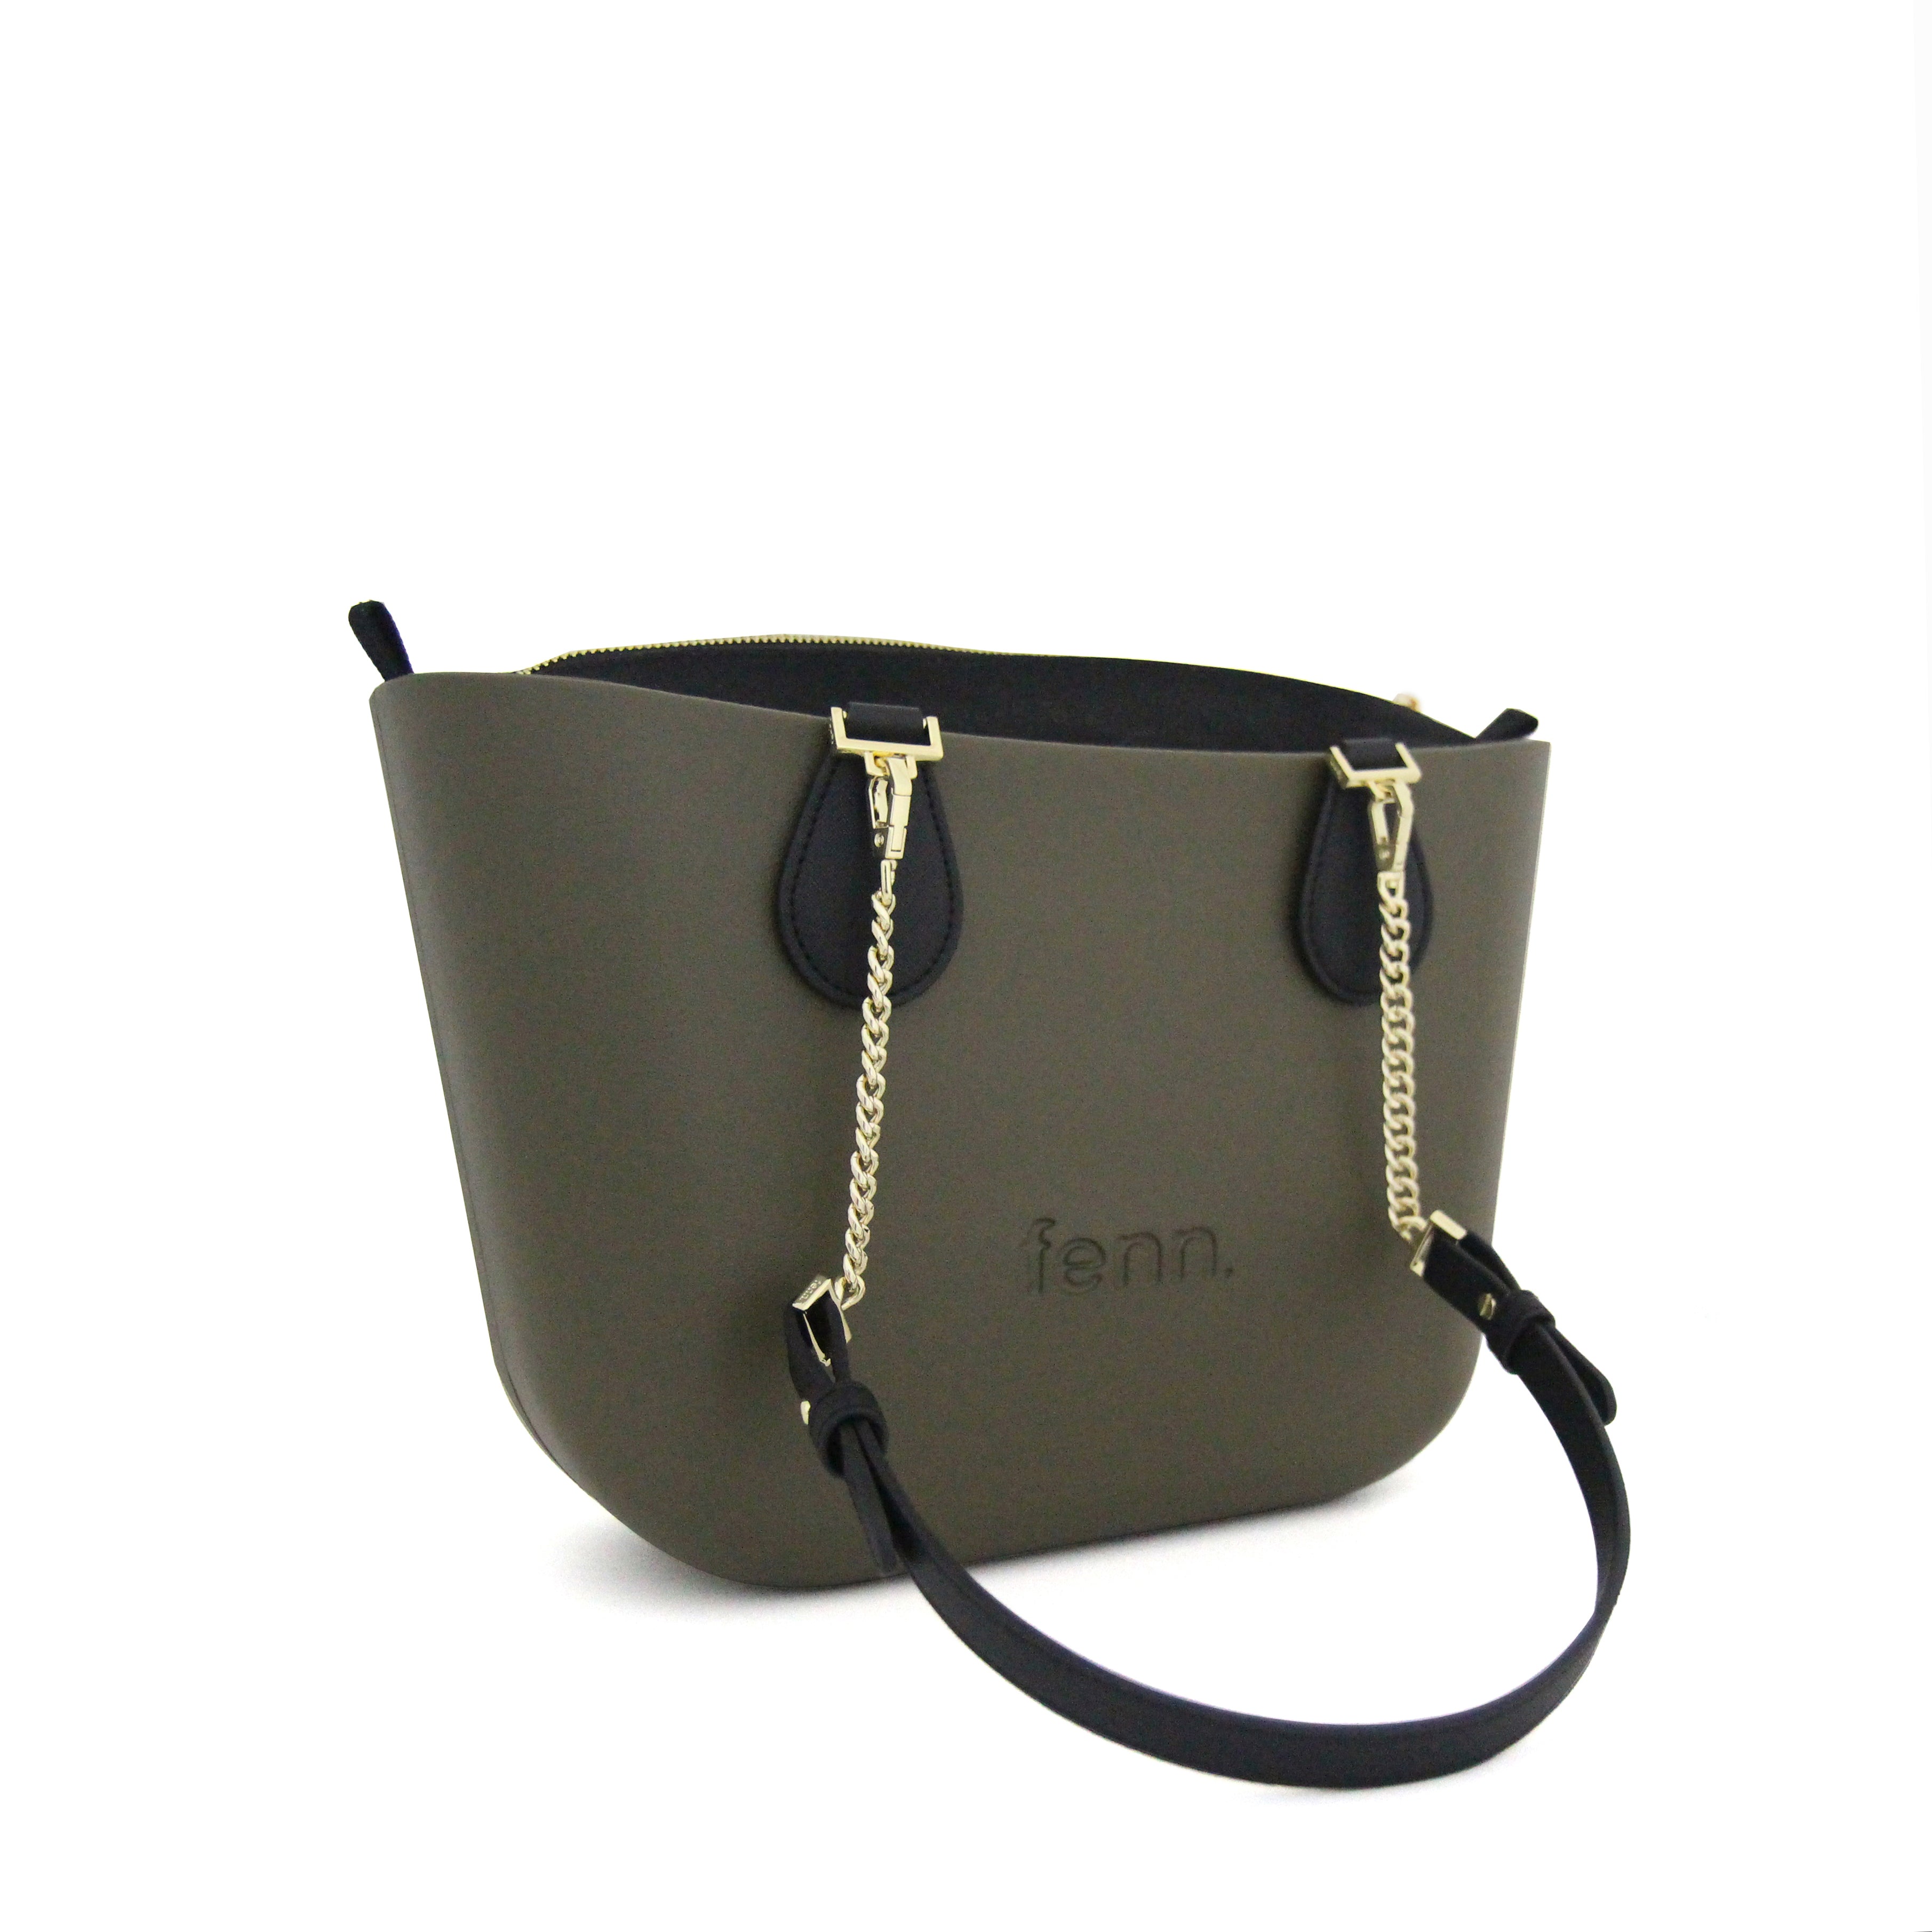 Petite KHAKI with black canvas inner and black / gold chain handle